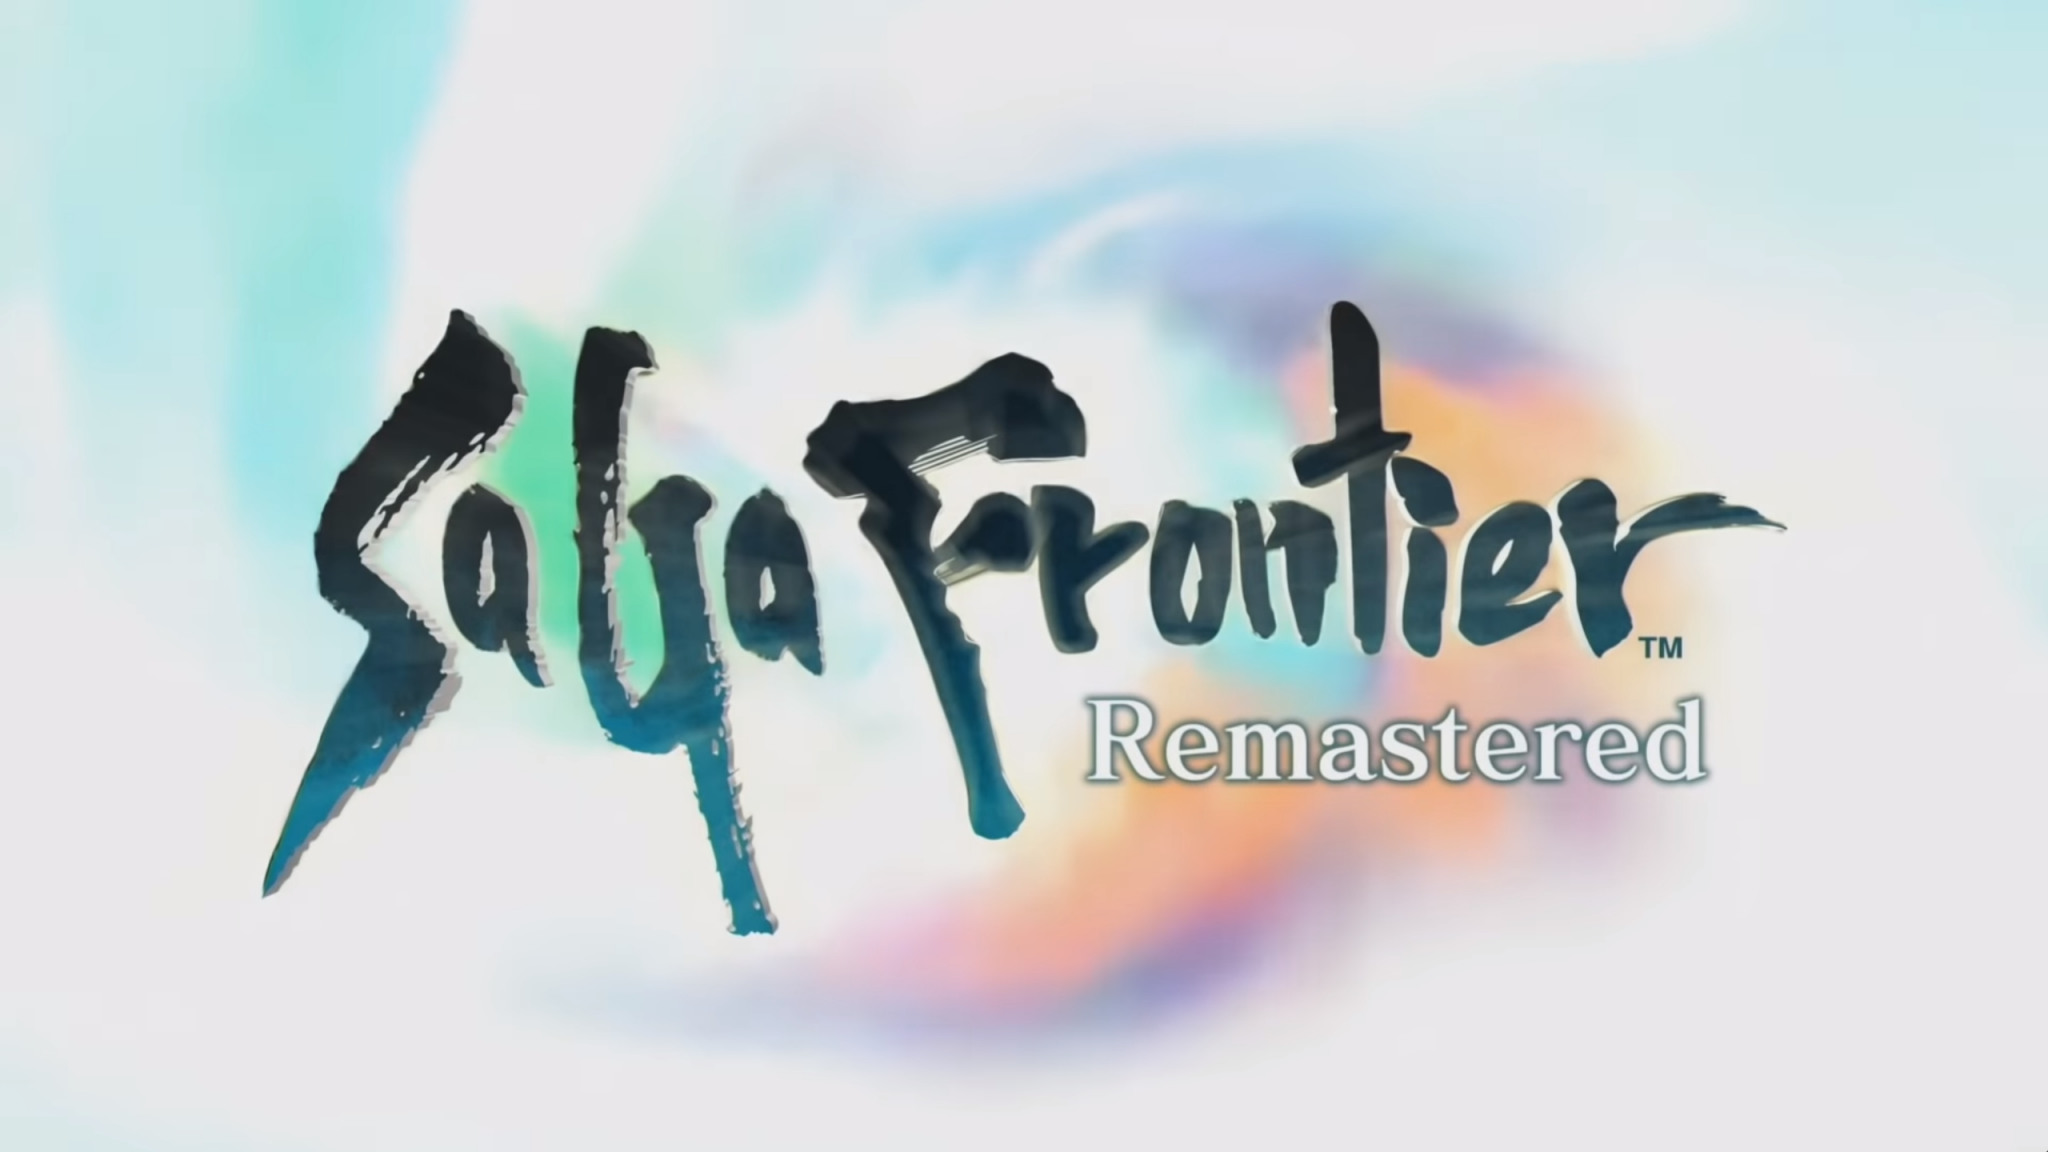 saga frontier remastered cheat table